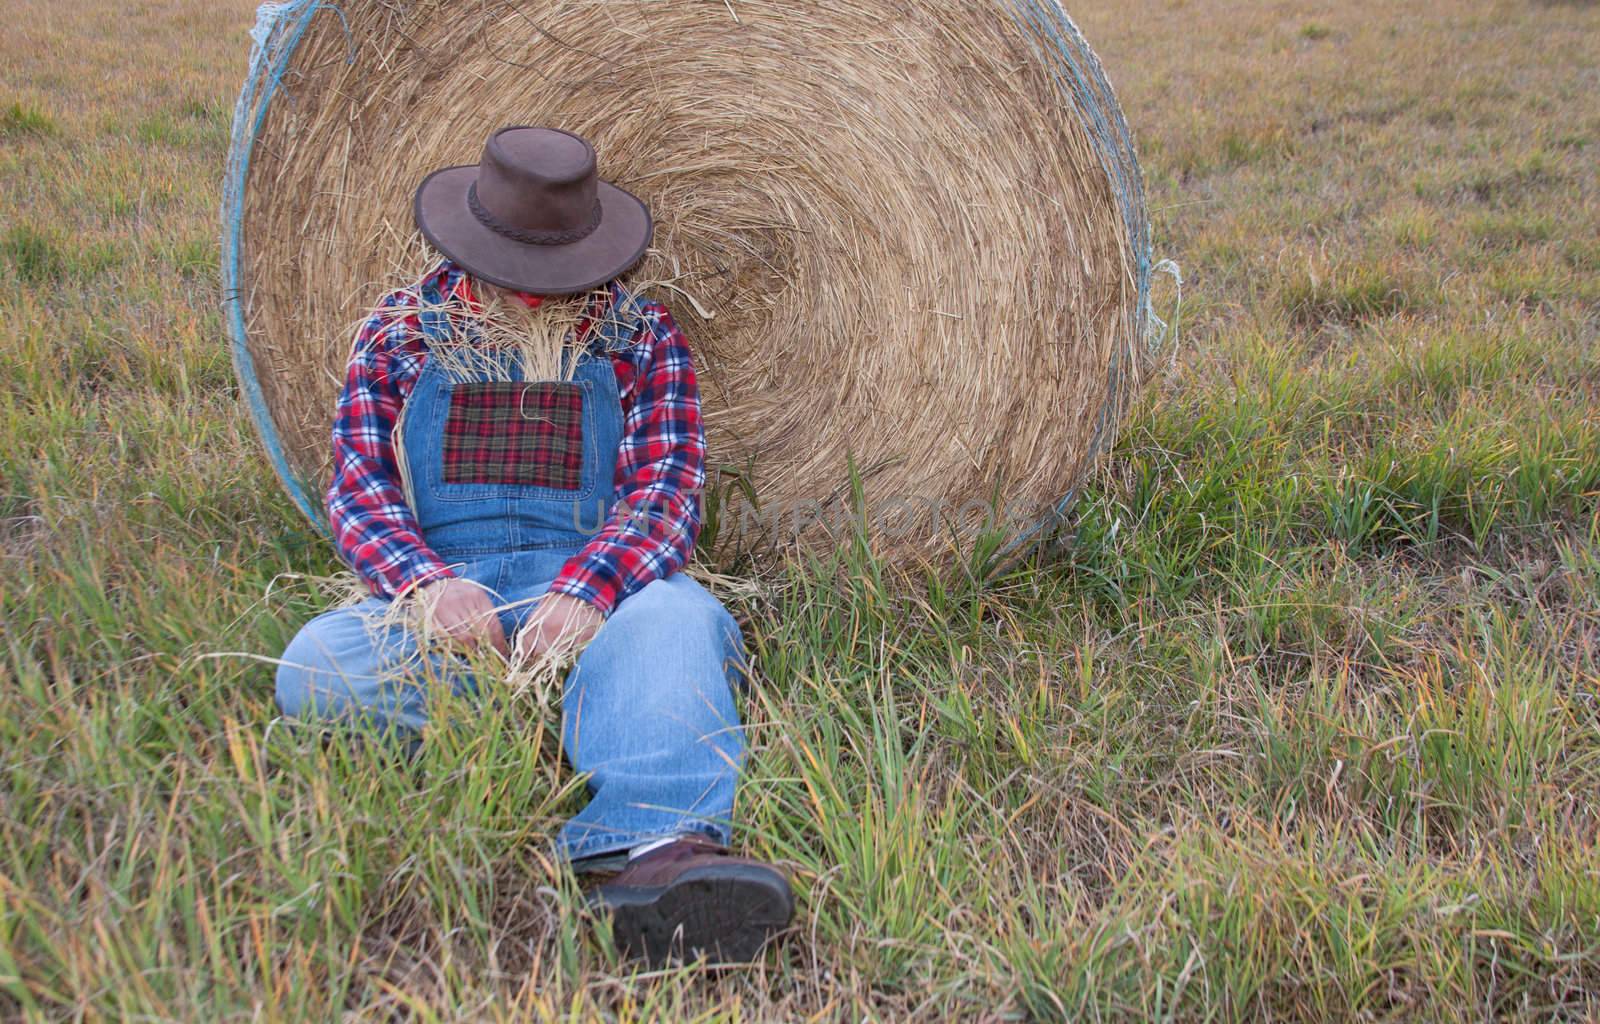 Scarecrow is sleeping on the job while leaning up against a hay bale.